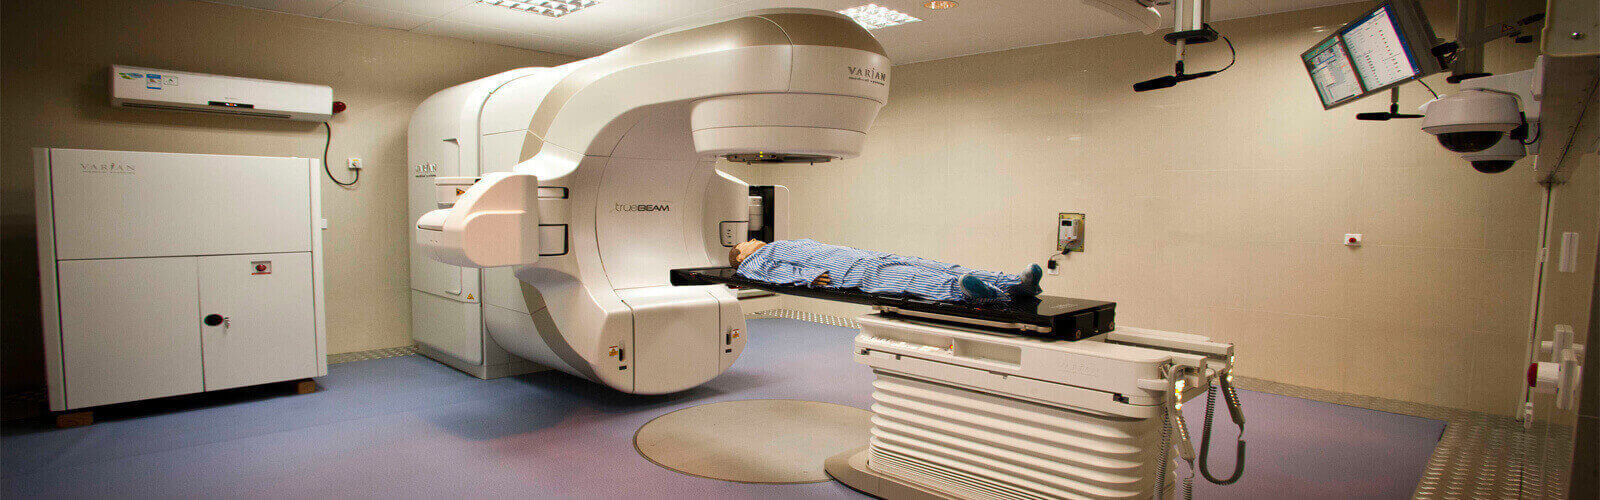 Radiotherapy in Wisconsin